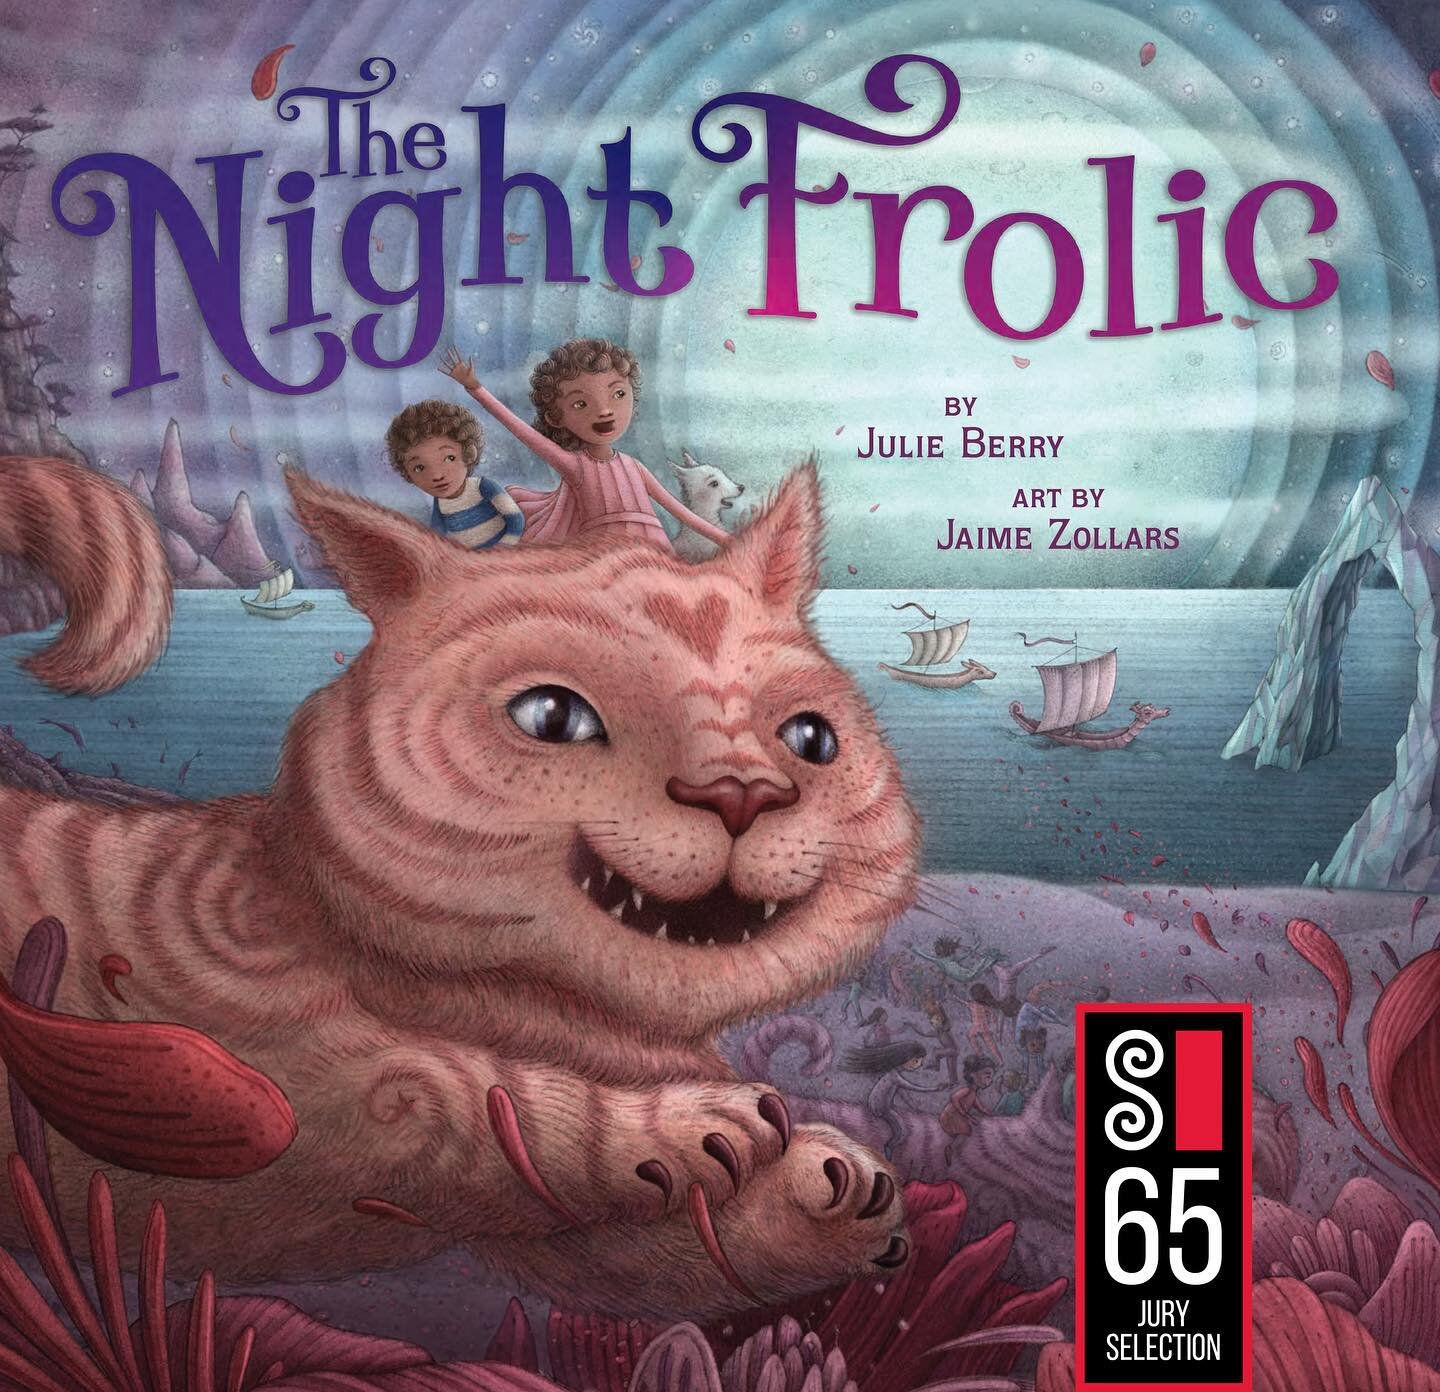 Happy to share that my illustrations for The Night Frolic by @julieberrybooks were accepted into the Illustrators 65 exhibition and publication as a series. An art piece or two will be on display at the Society of Illustrators, NYC in February! The b